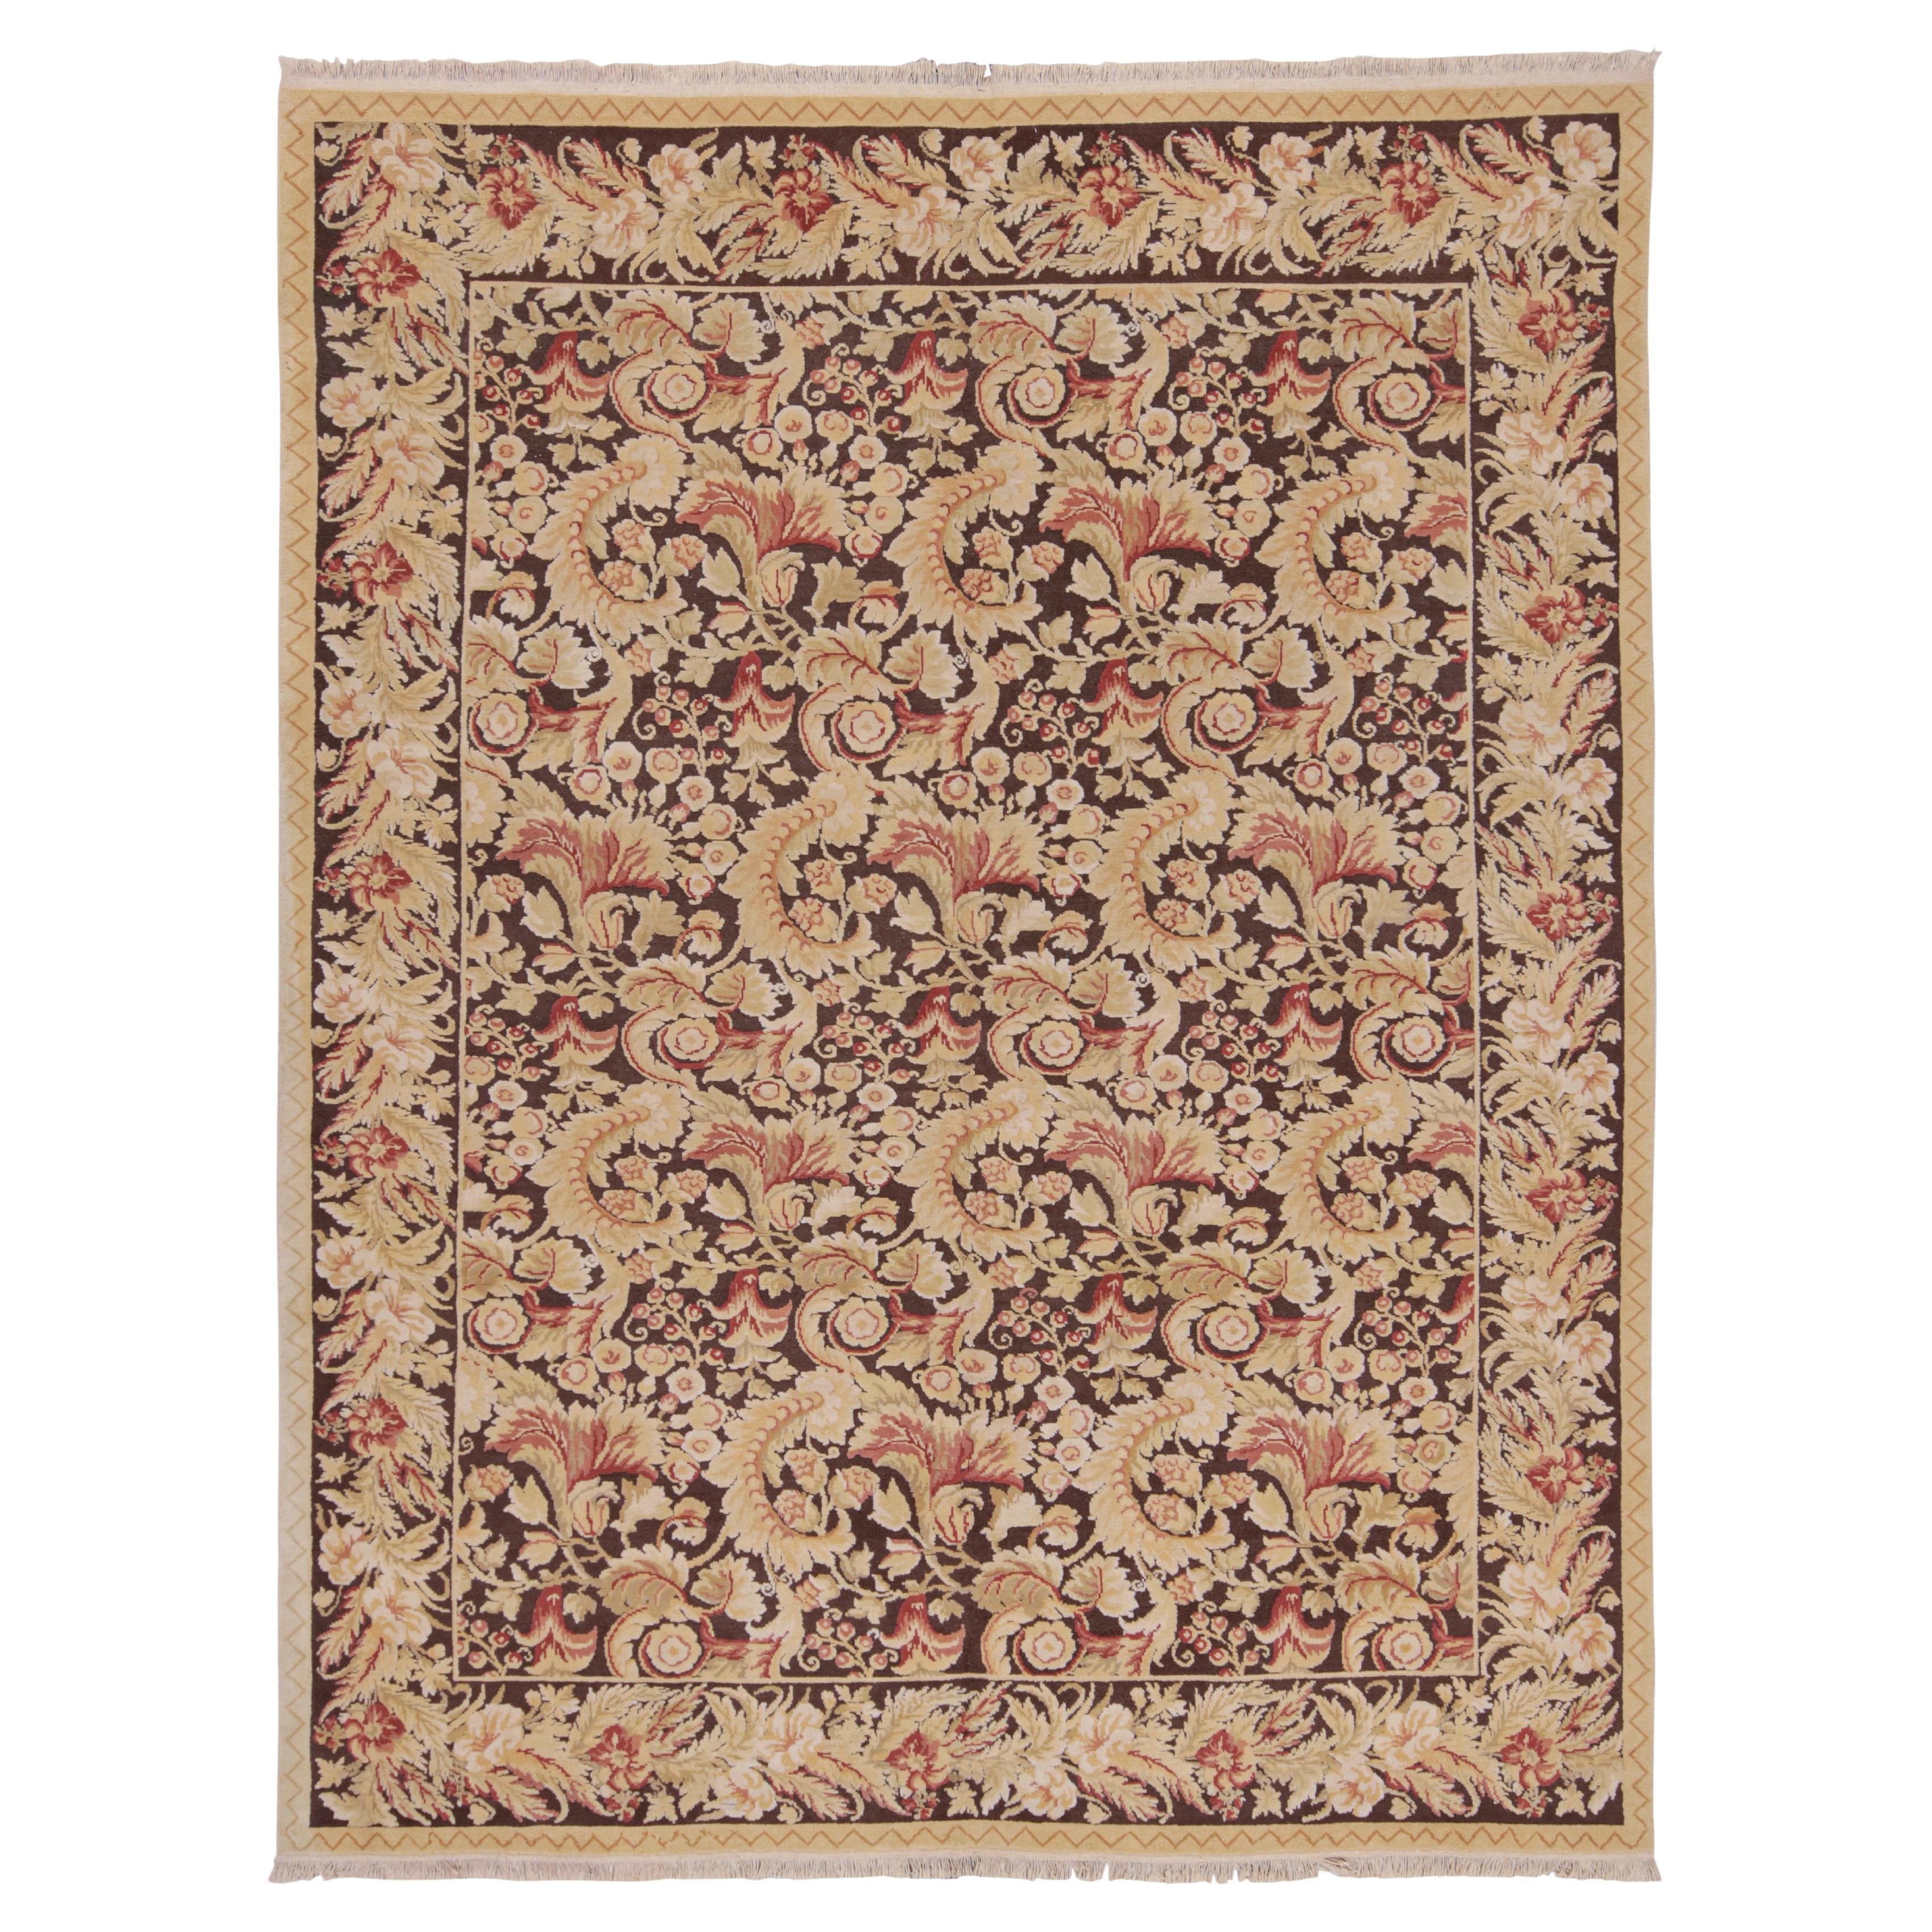 Rug & Kilim's Modern 18th Century Style Wool Rug Brown and Beige All-Over Floral